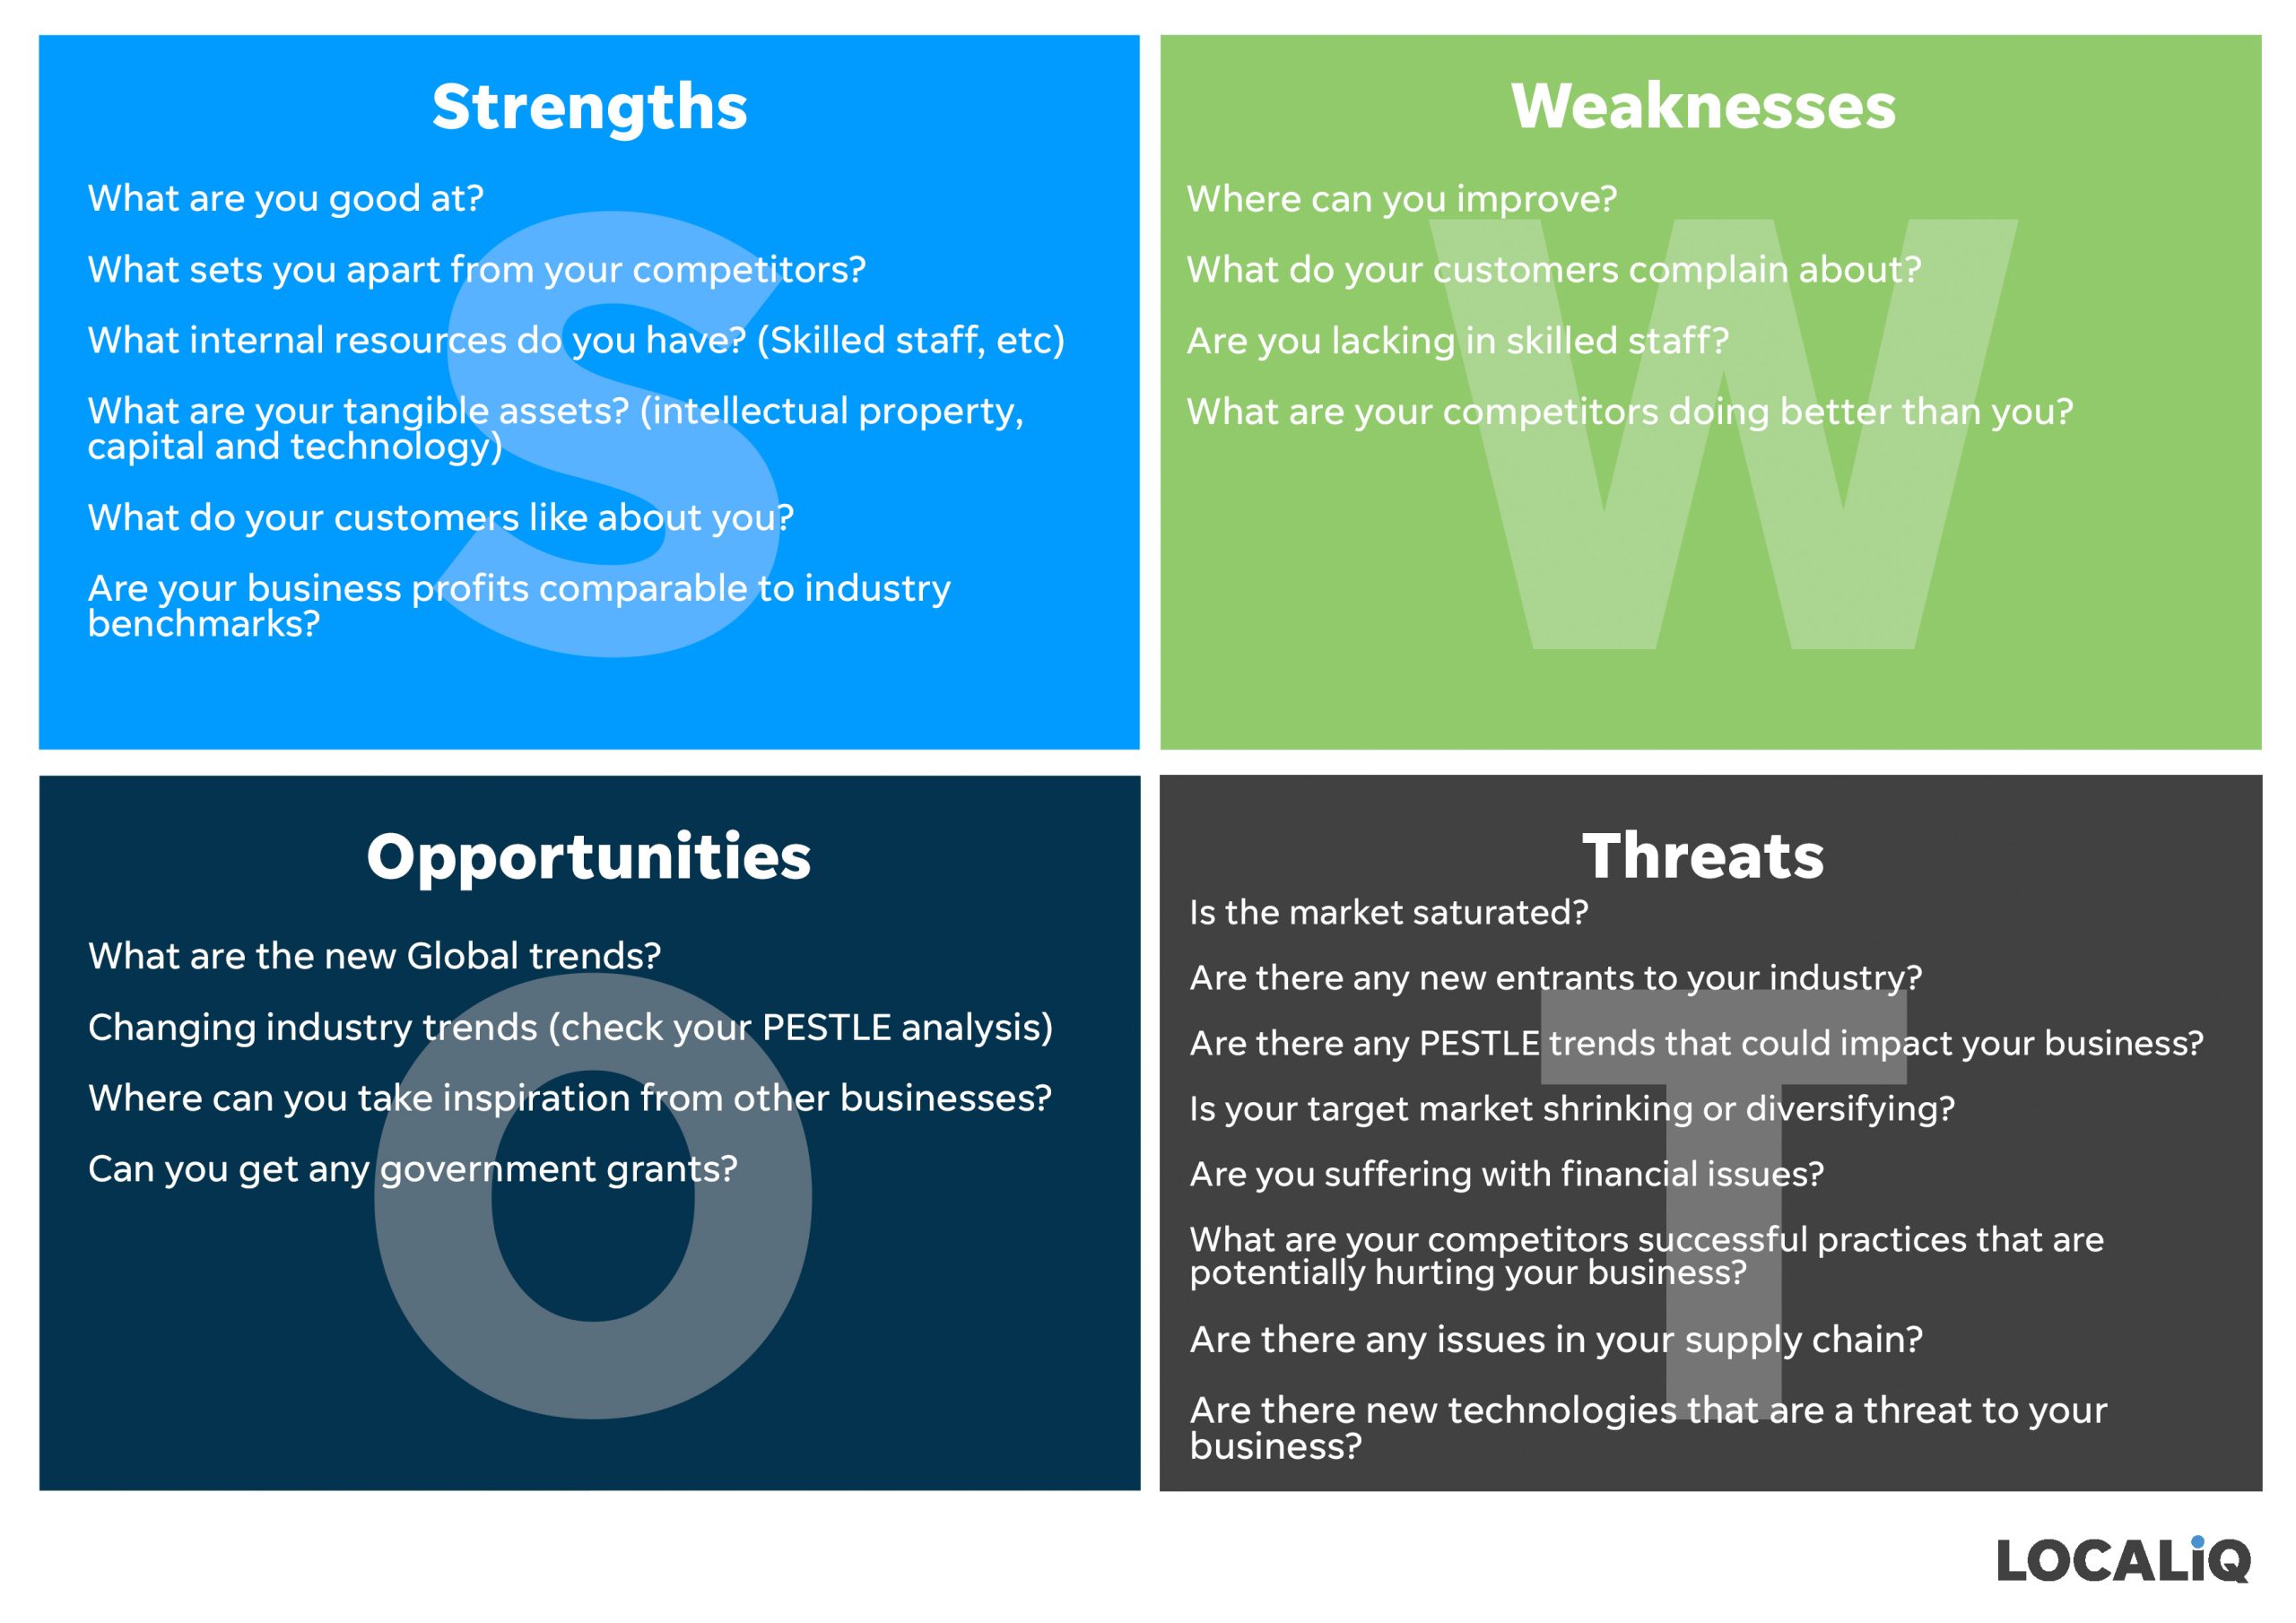 a swot analysis is a type of business plan